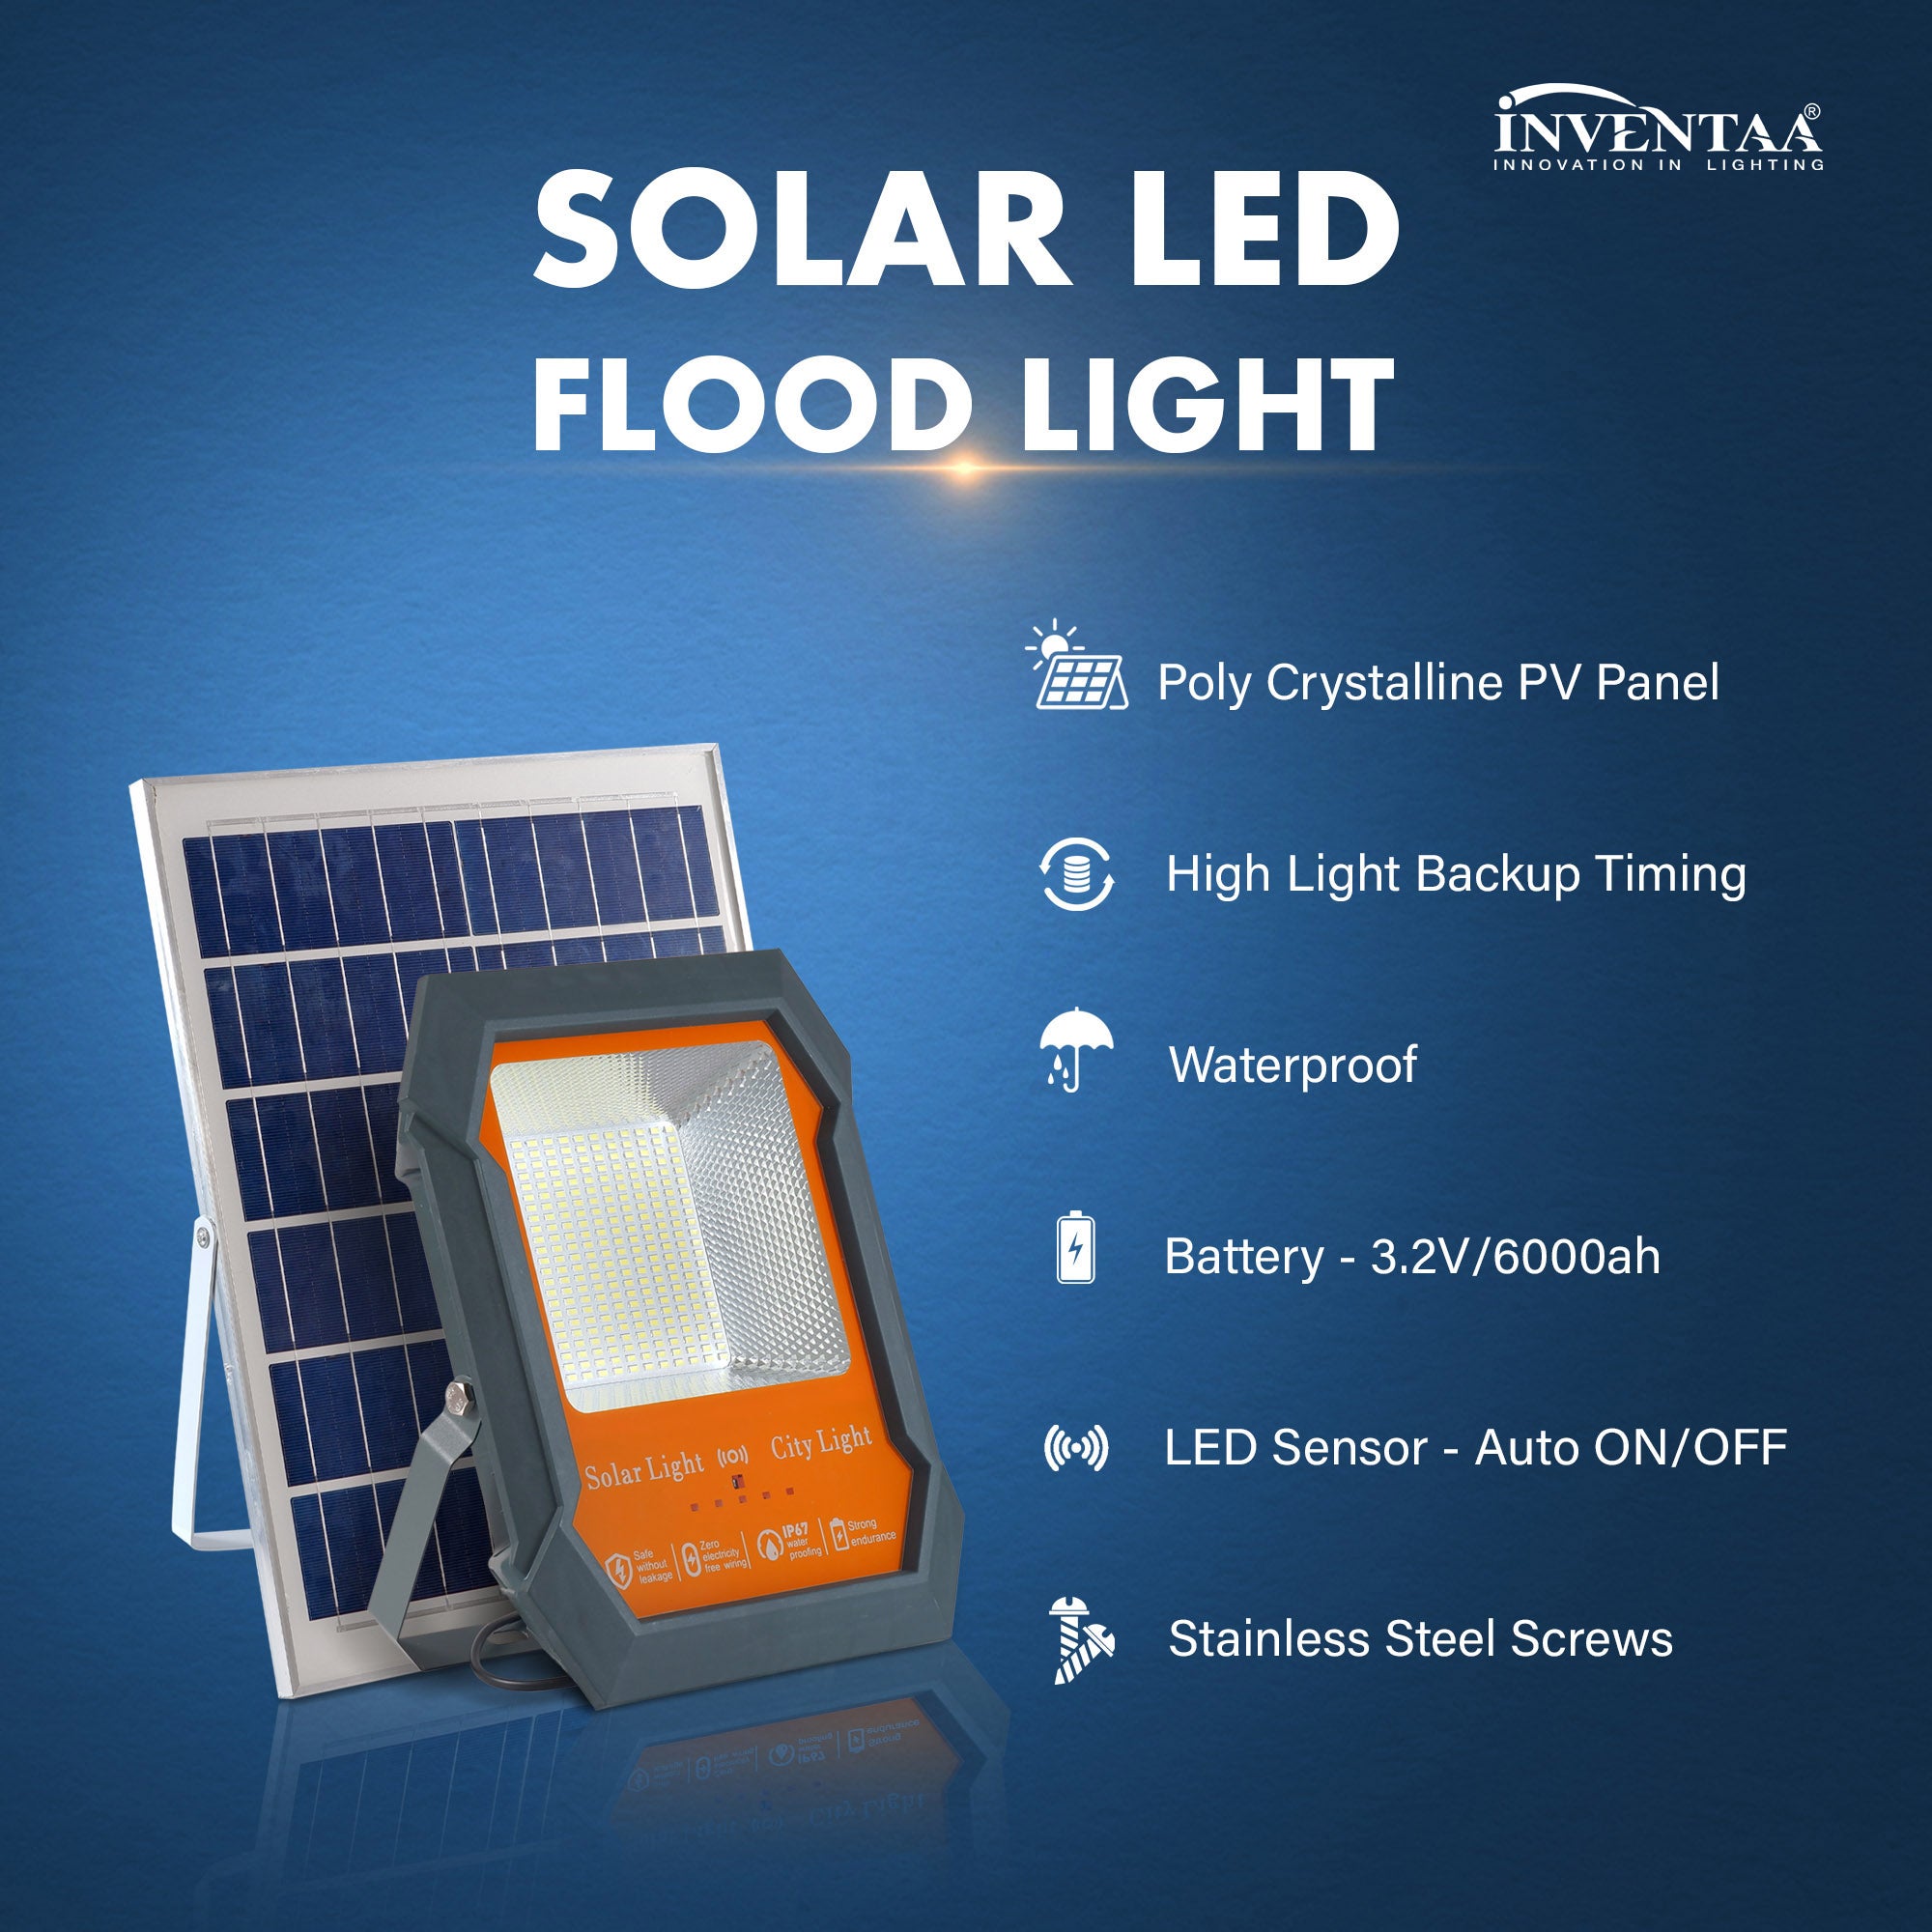 Features Of Adhira LED Flood Light